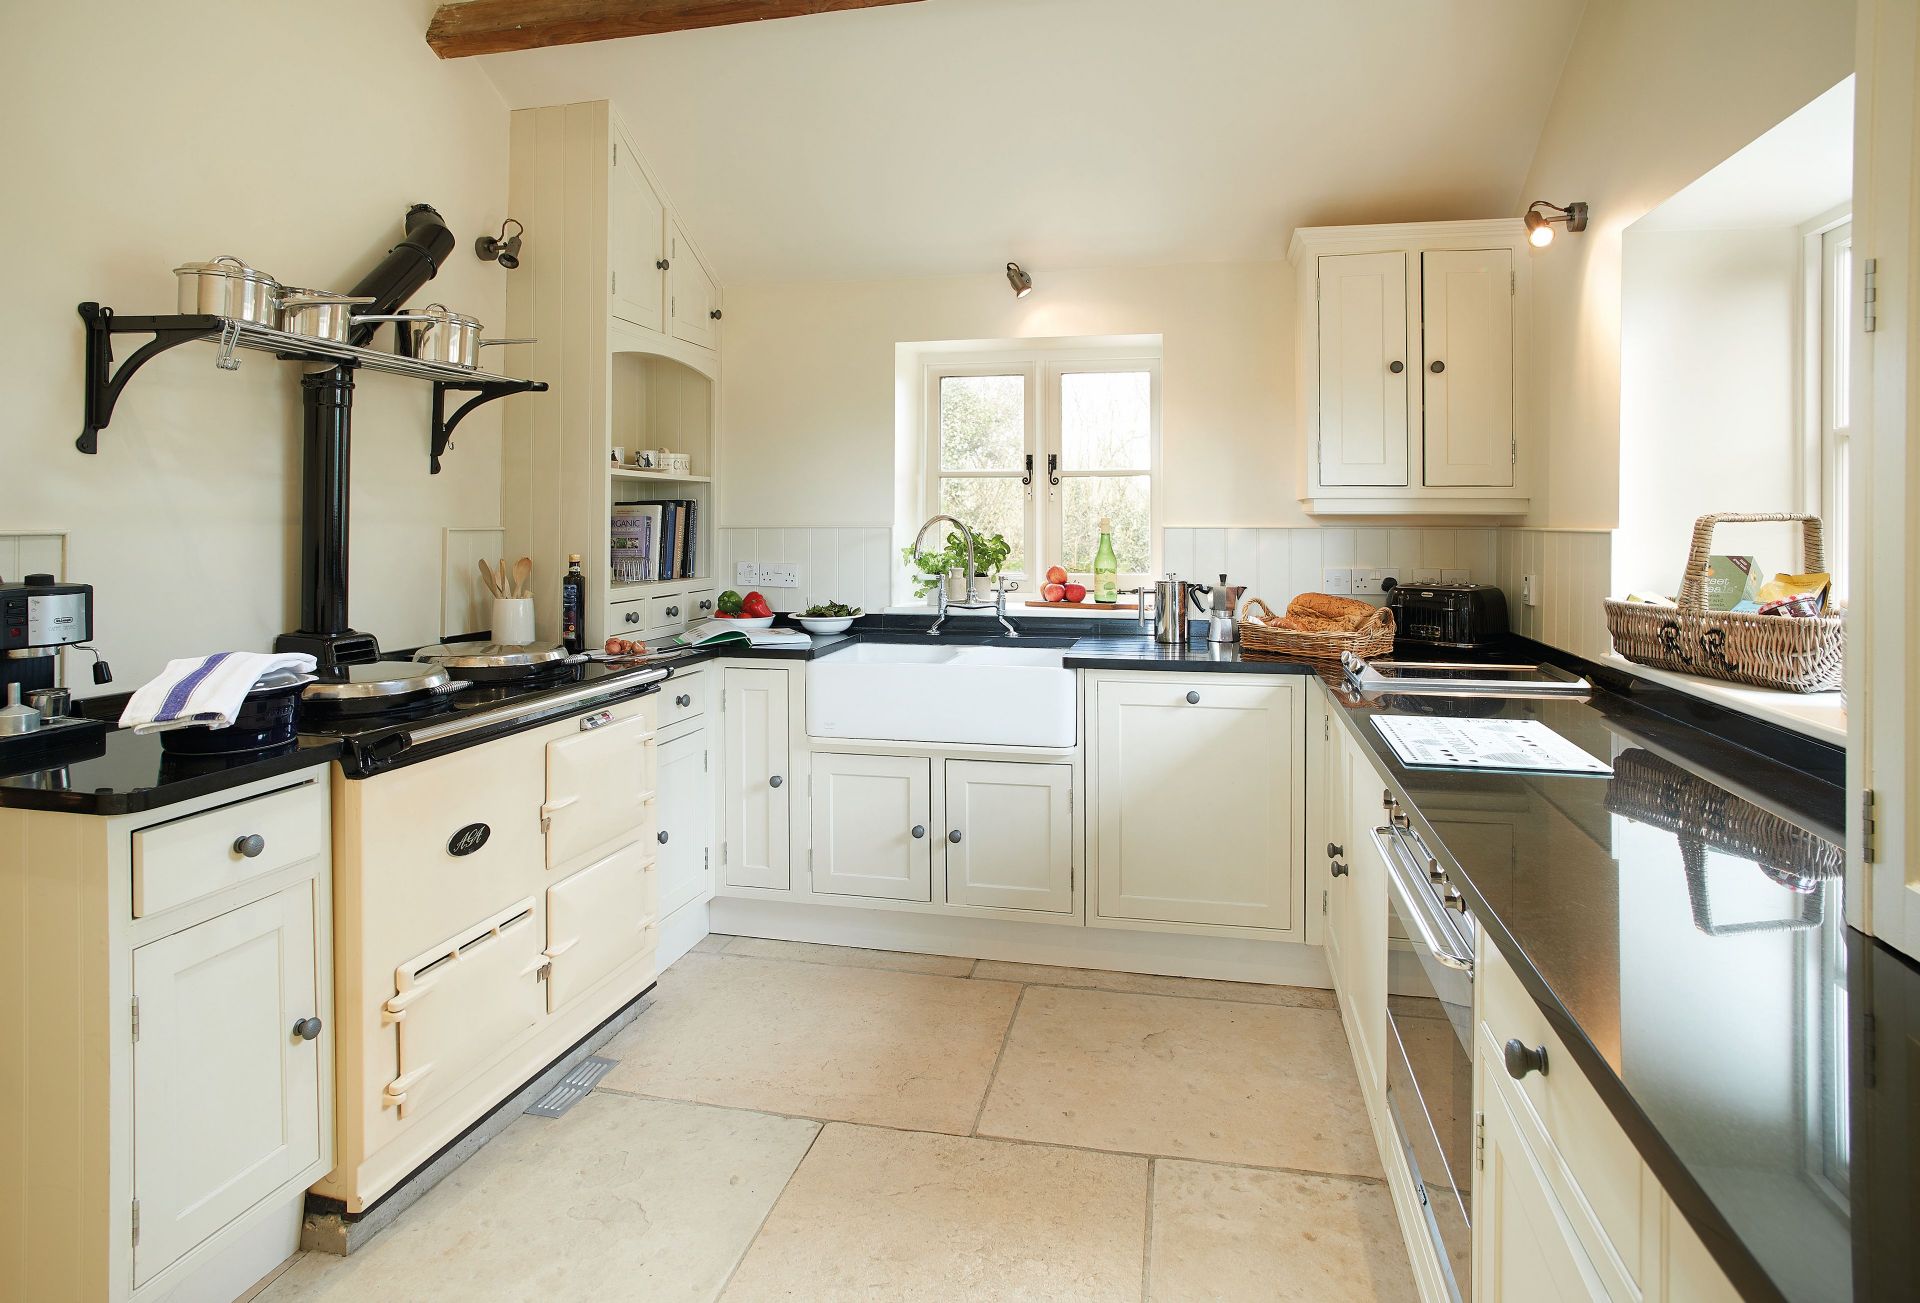 Benville Cottage is located in Beaminster and surrounding villages